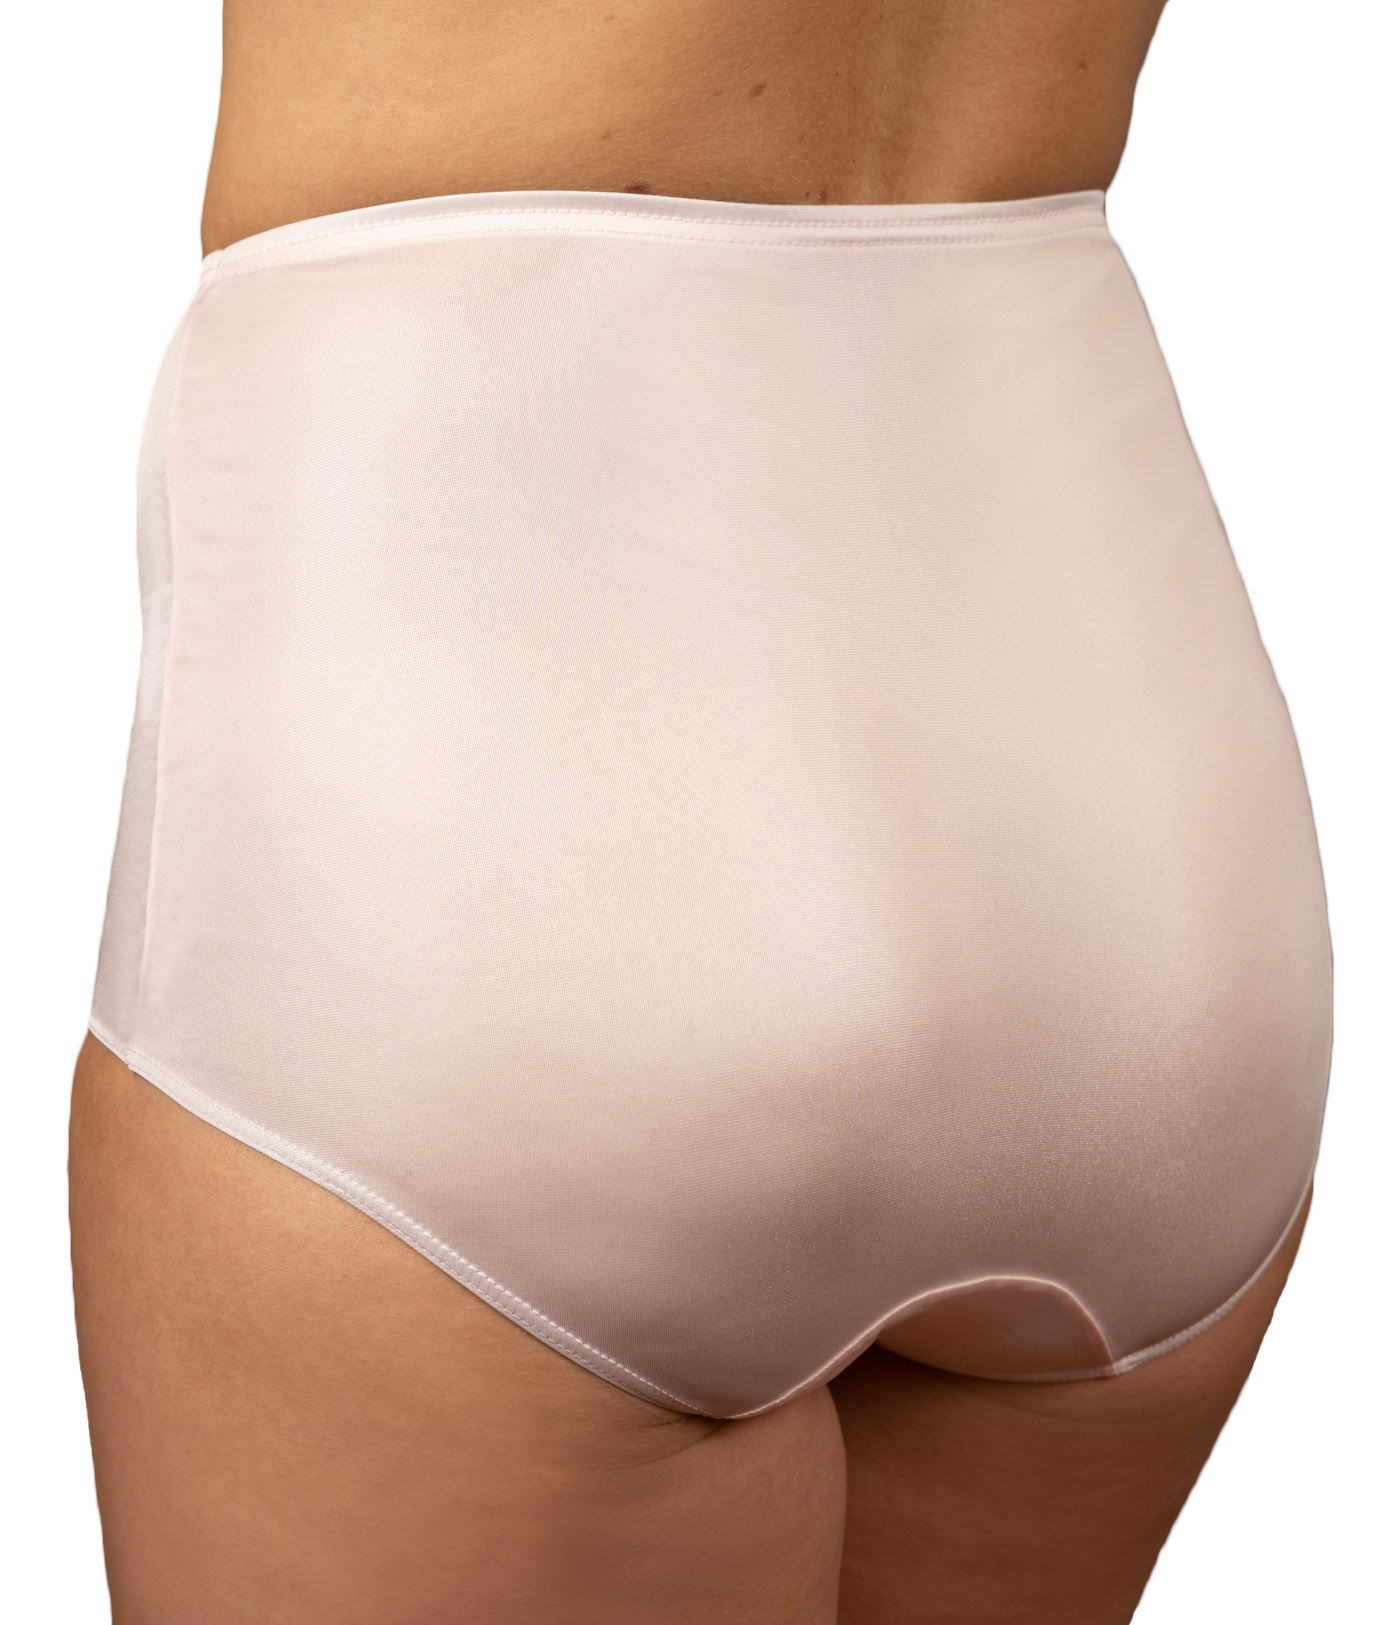 BODY GLAMOUR - LADIES SMALL, MED OR L - 100% NYLON PANTY BRIEF